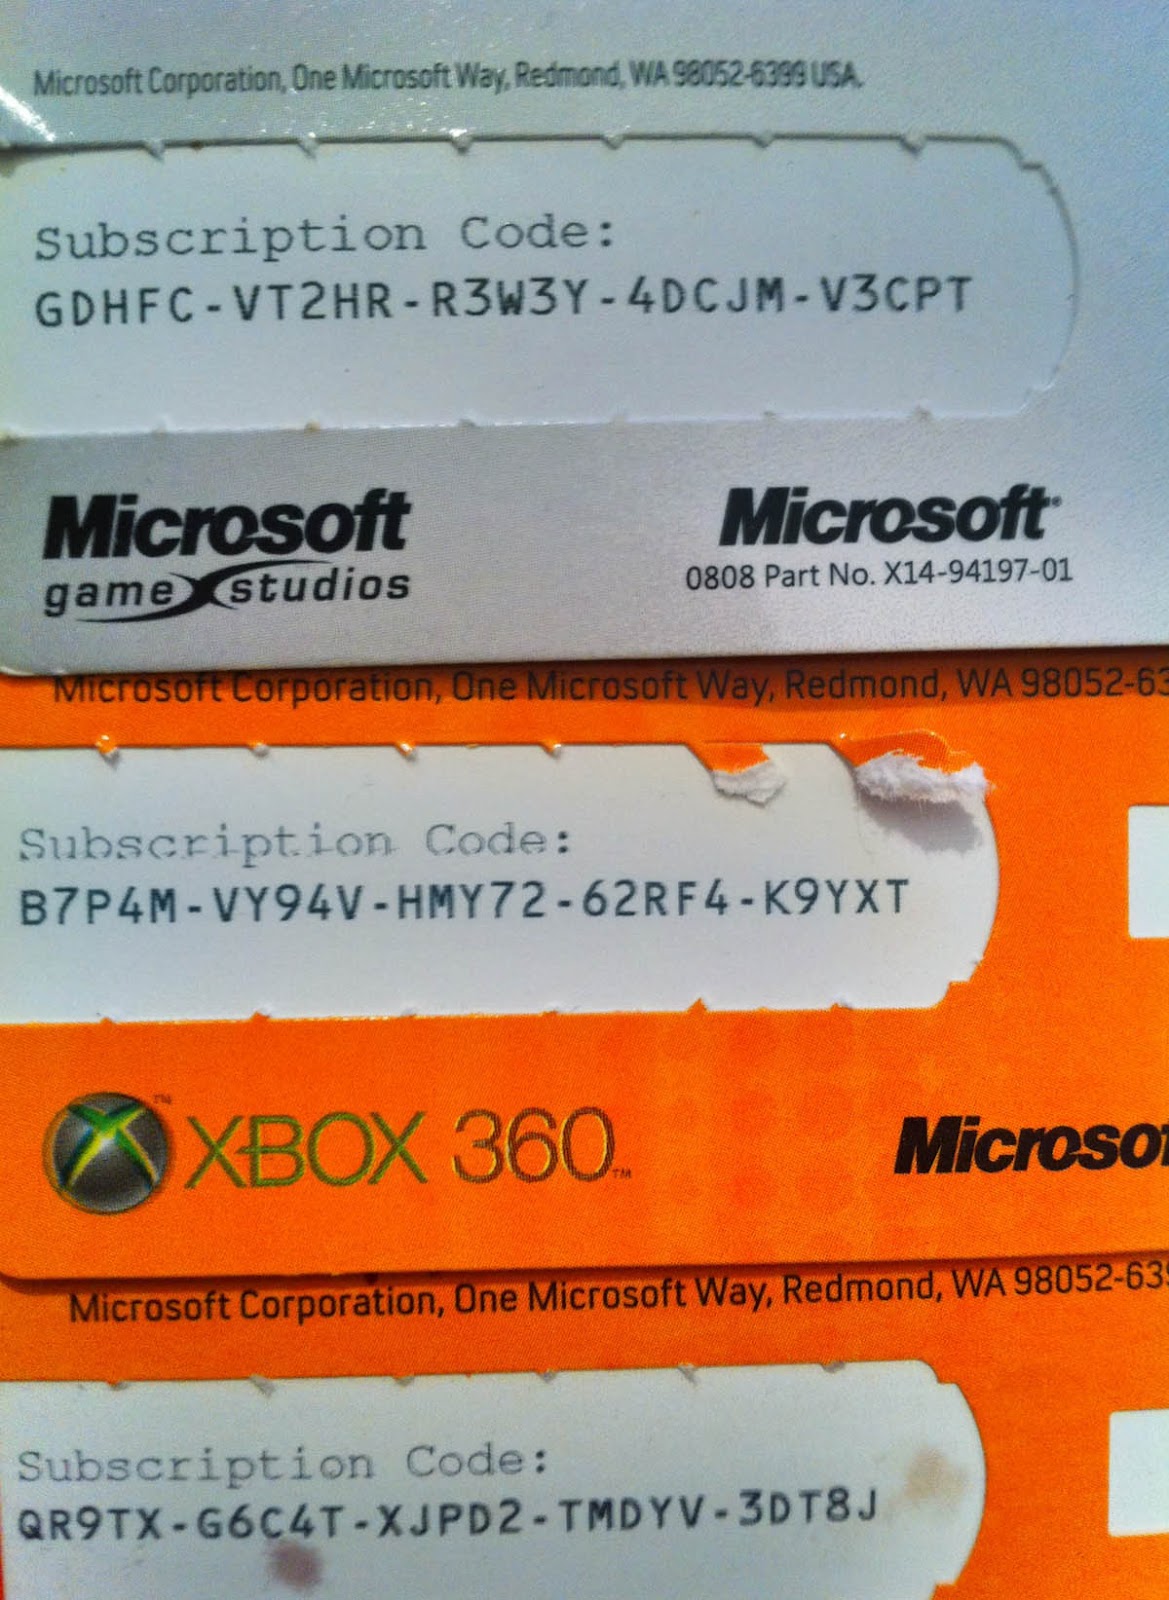 14 day trail code for gamepass and xbox live gold. : r/xboxone